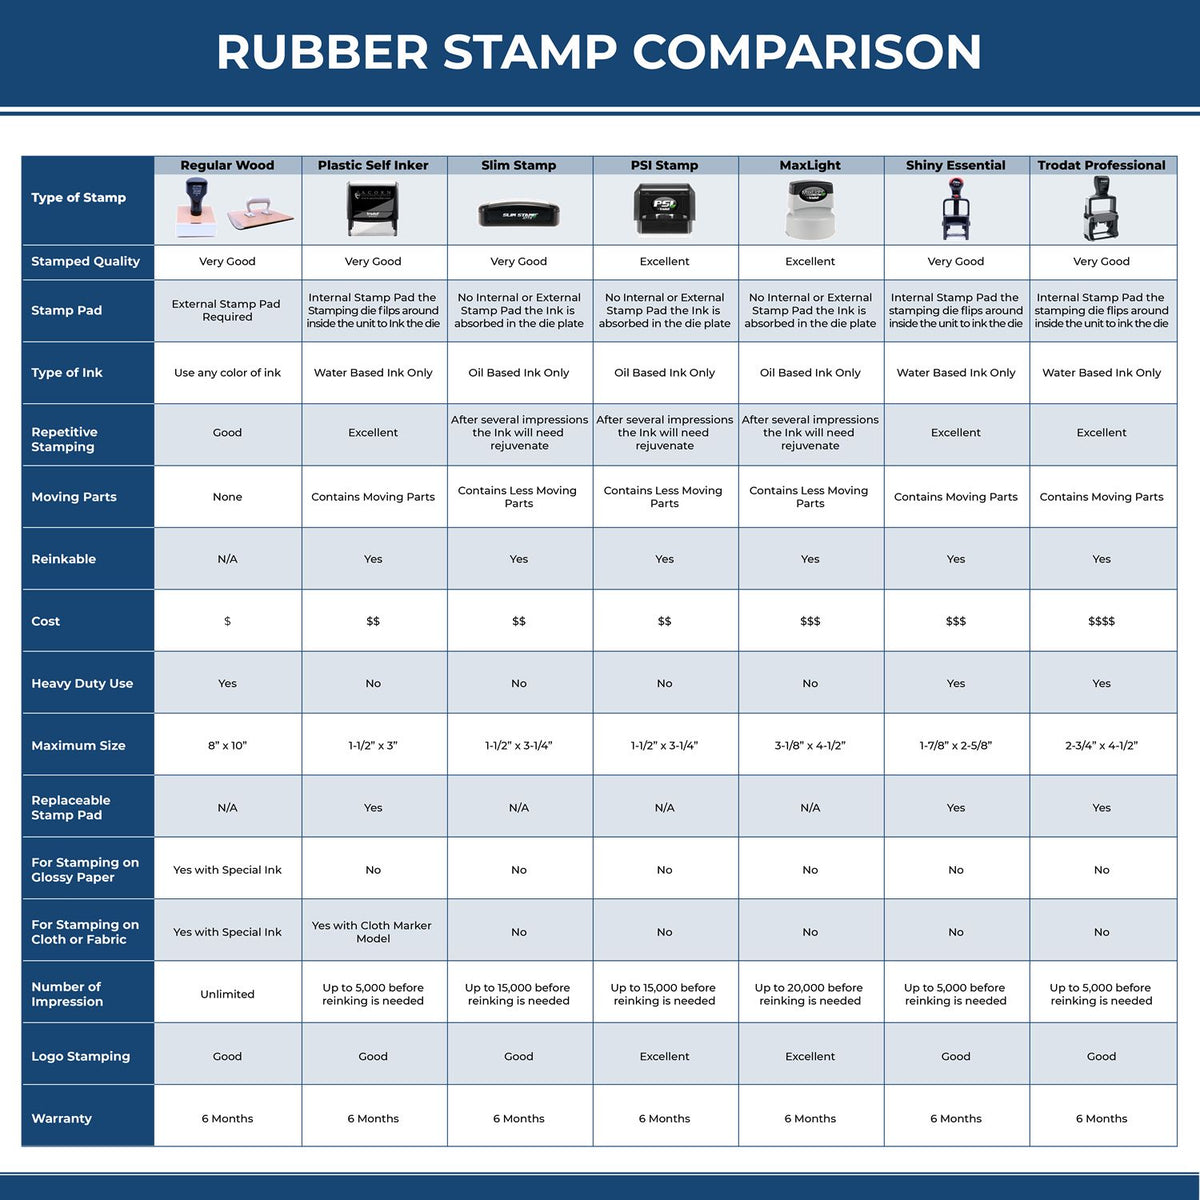 A comparison chart for the different types of mount models available for the MaxLight Premium Pre-Inked Georgia Rectangular Notarial Stamp.